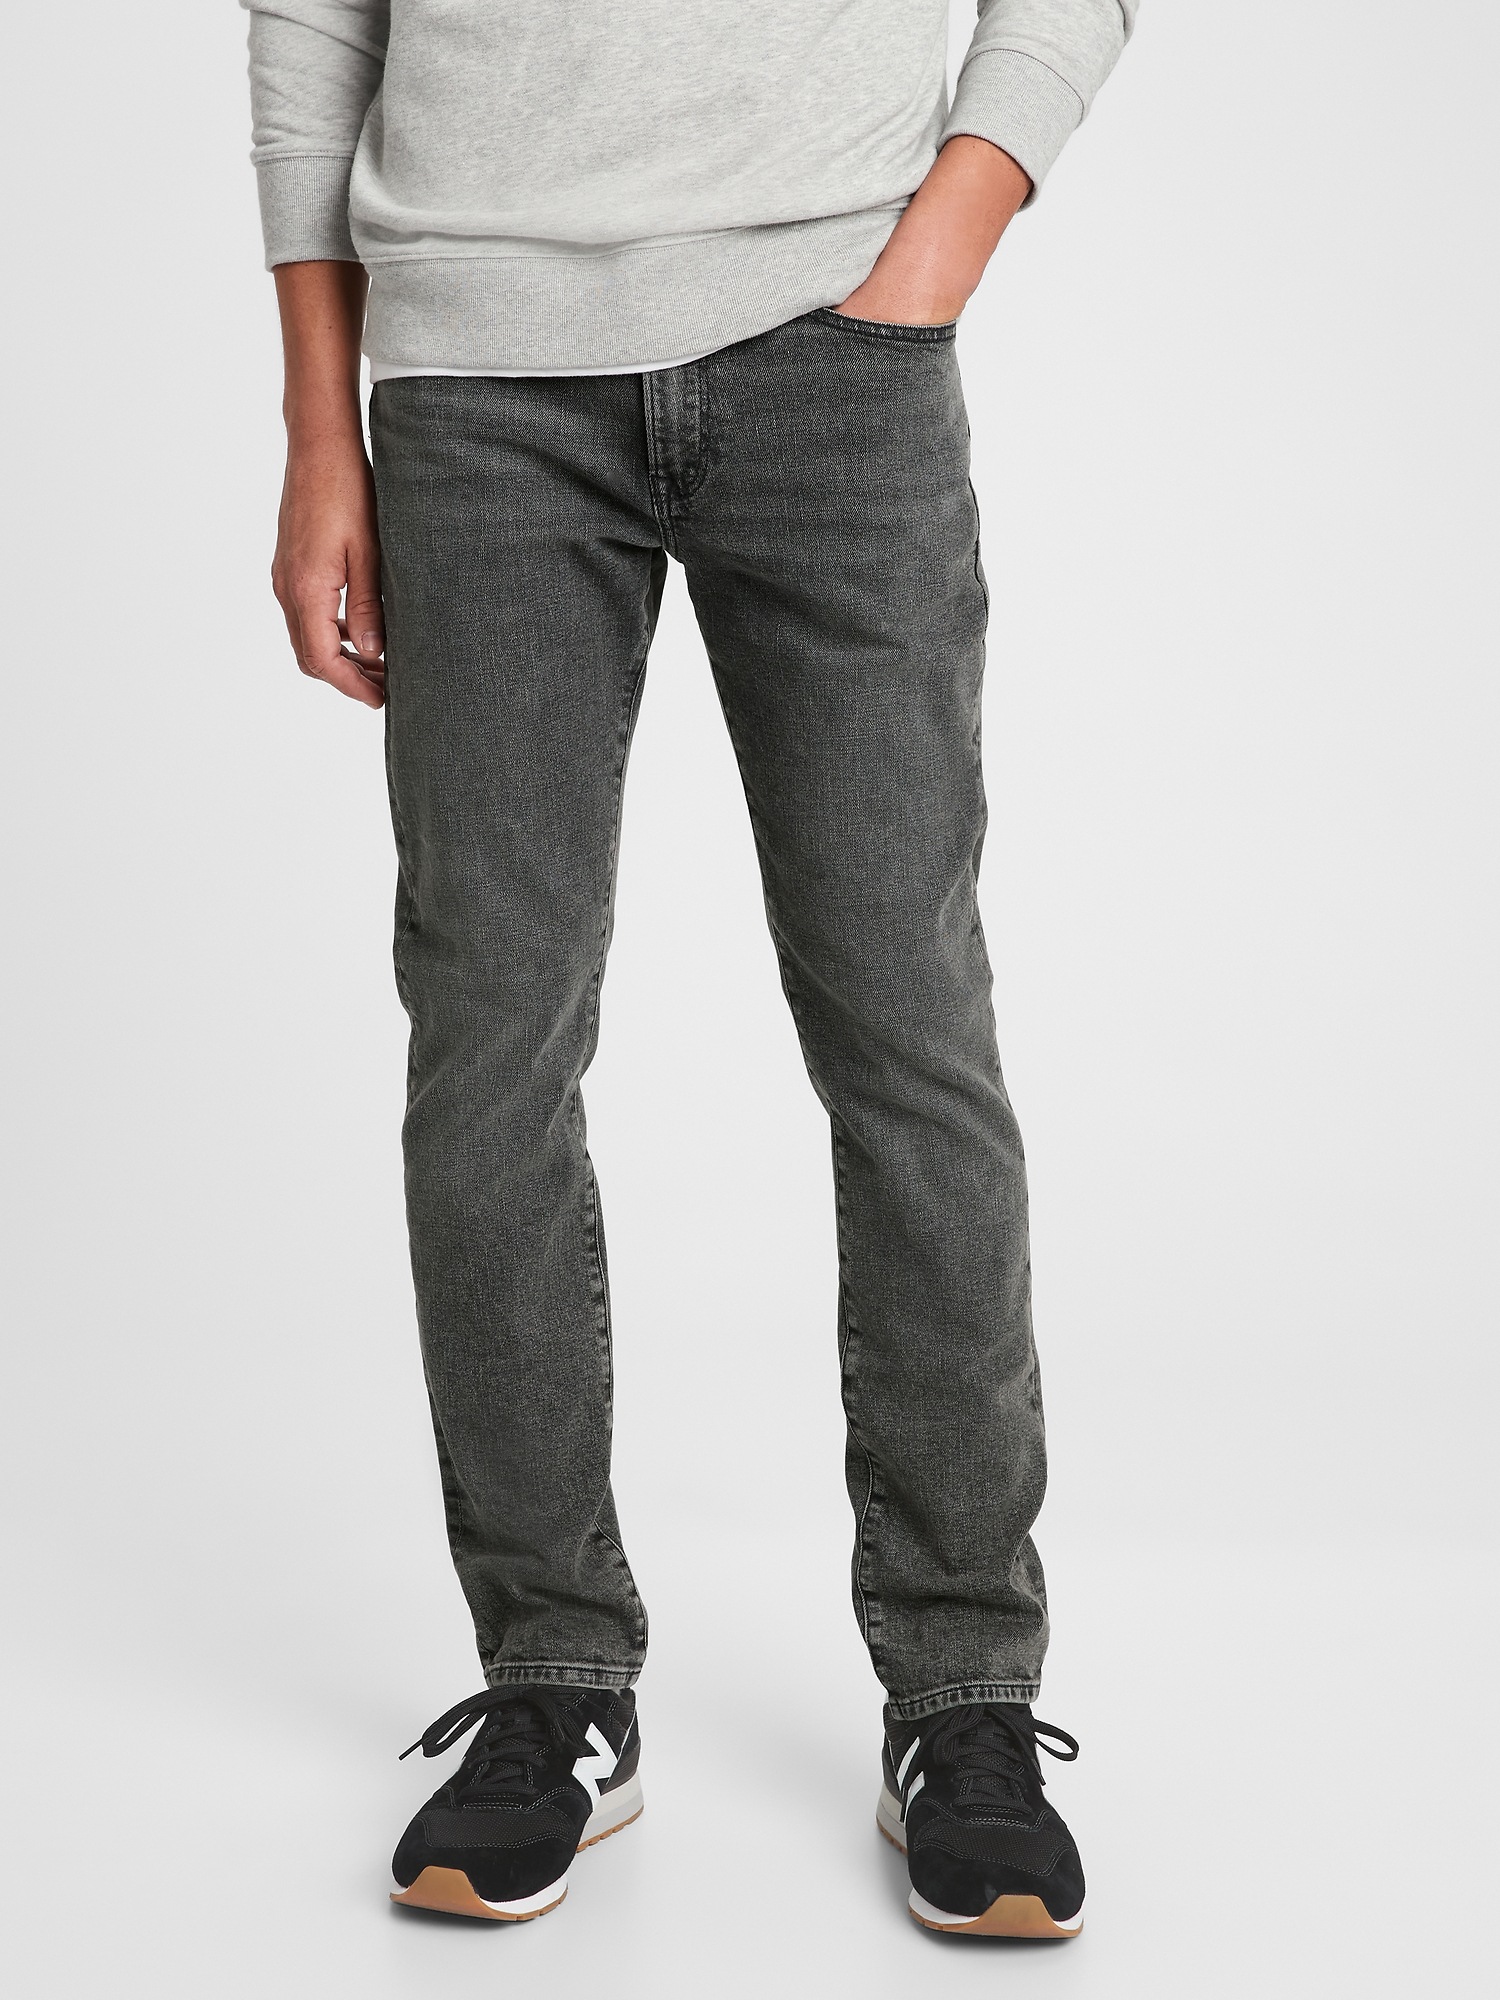 Slim Jeans with Washwell | Gap Factory